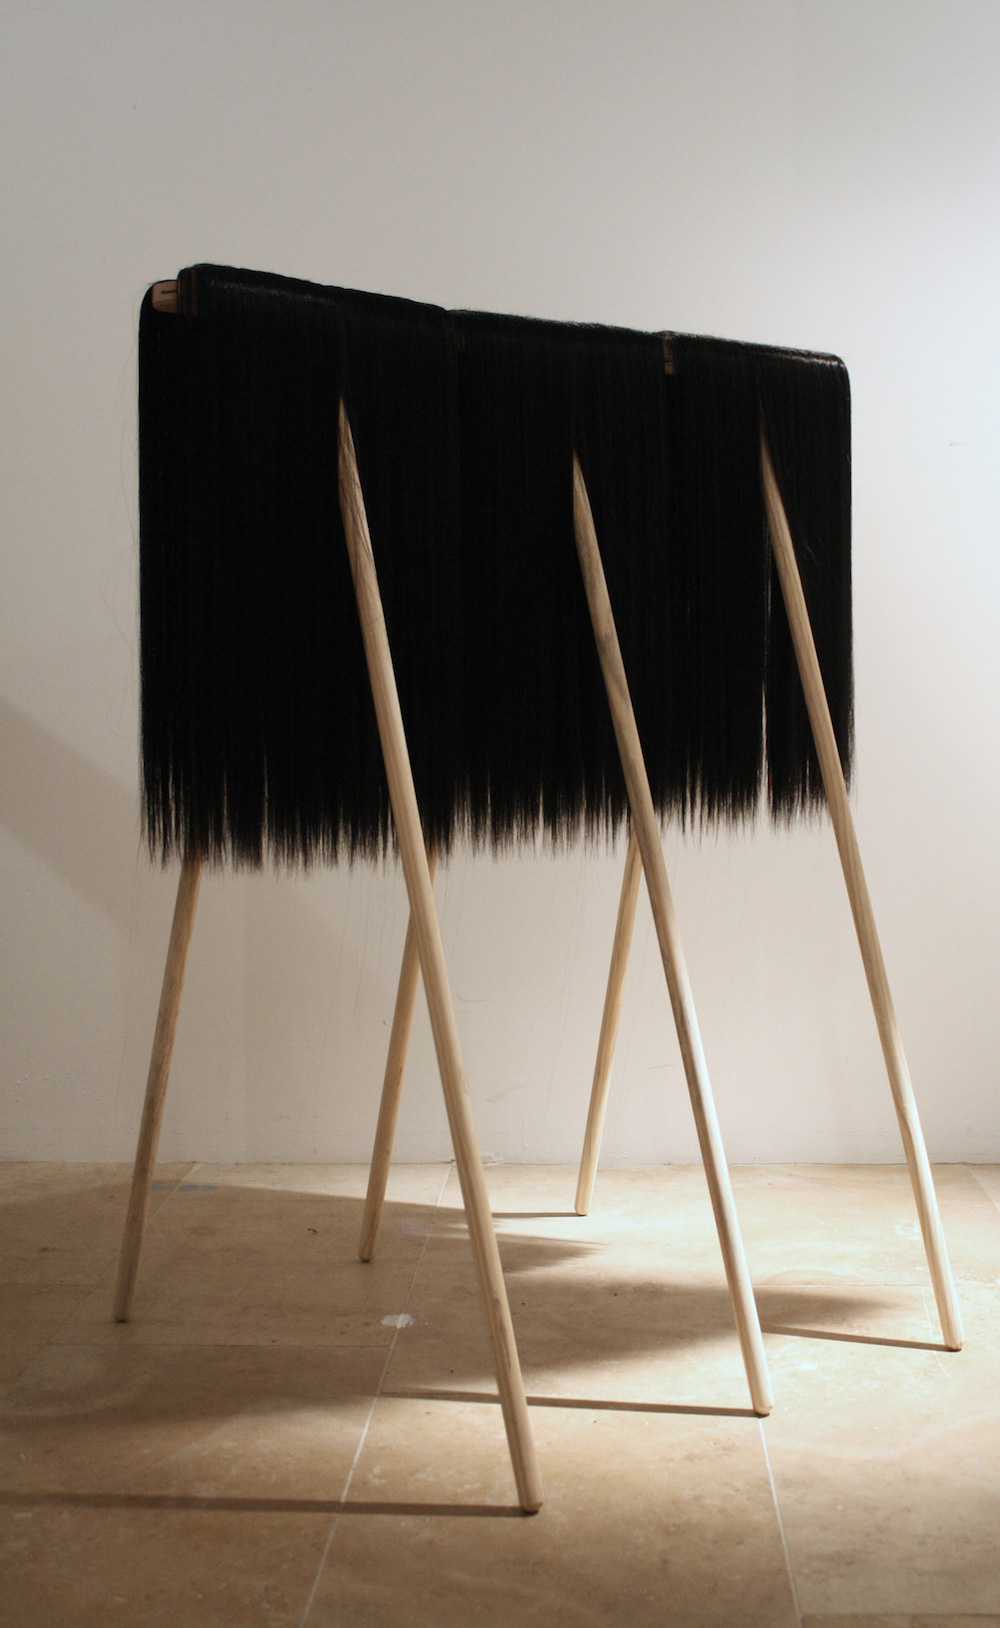  Long-bodied Cellar Brooms 90 x 115 x 72 cm Synthetic hair and wooden brooms 2015 